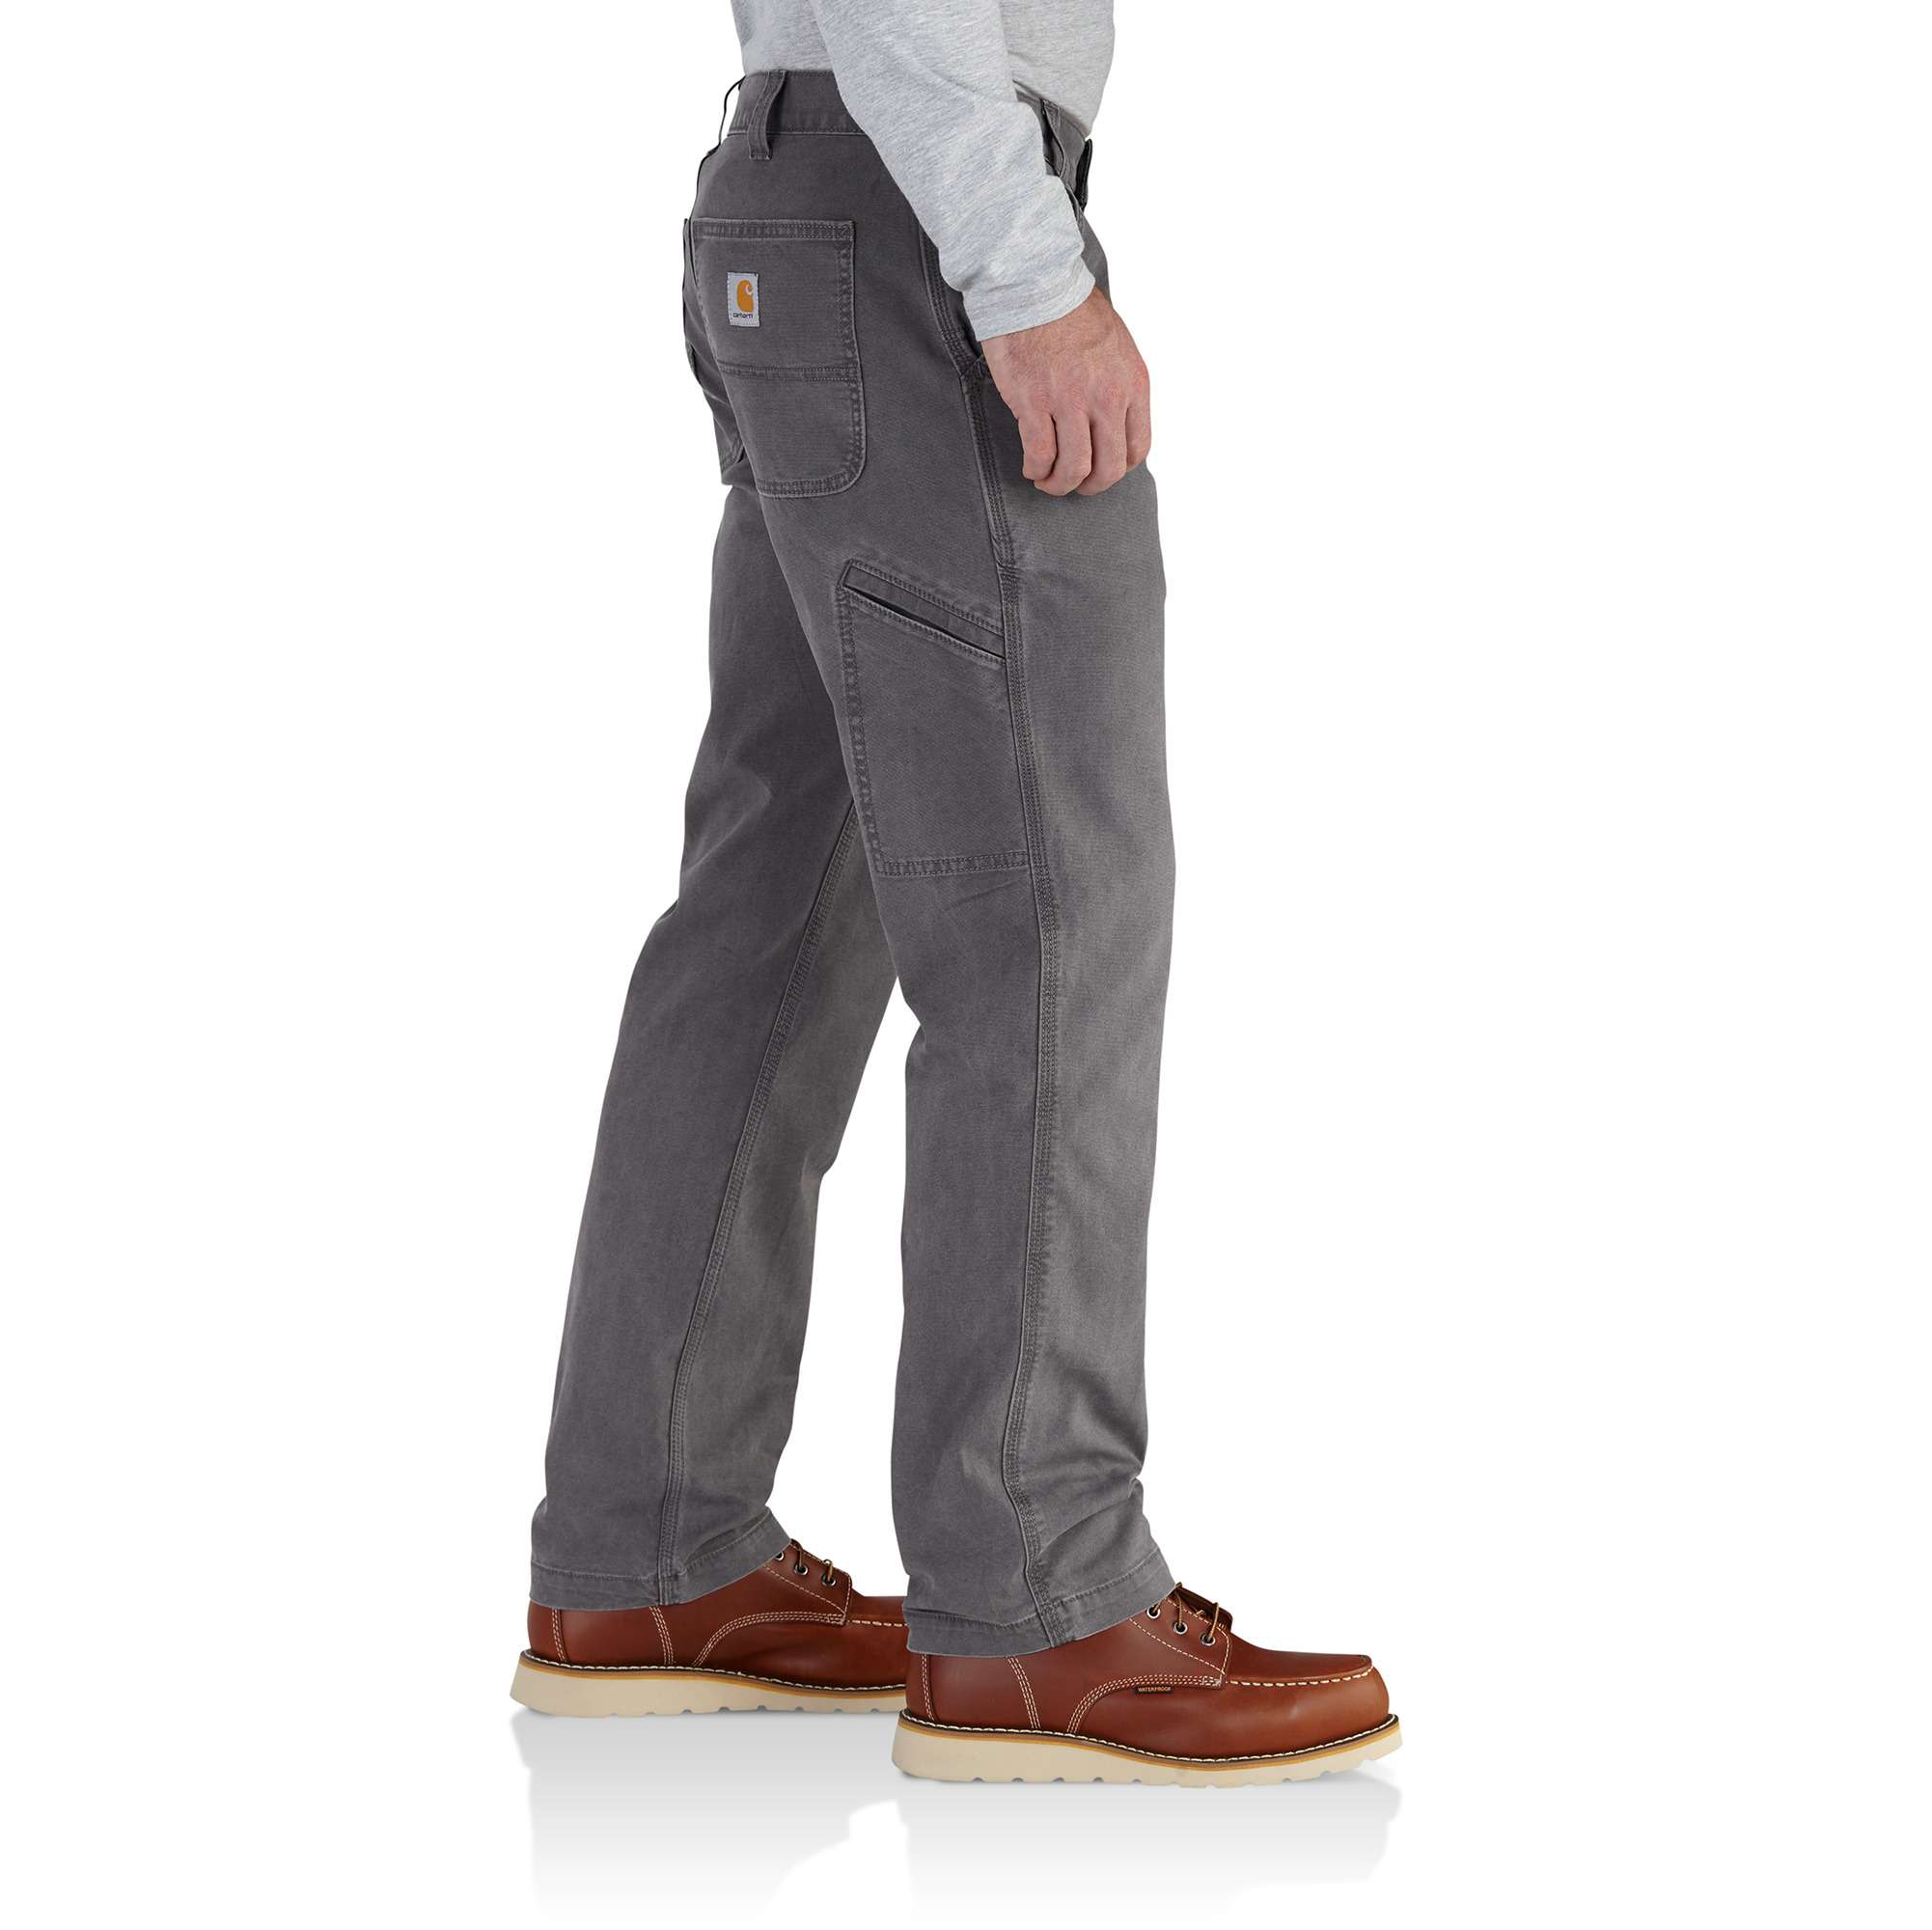 Carhartt work pants for men • Compare best prices »